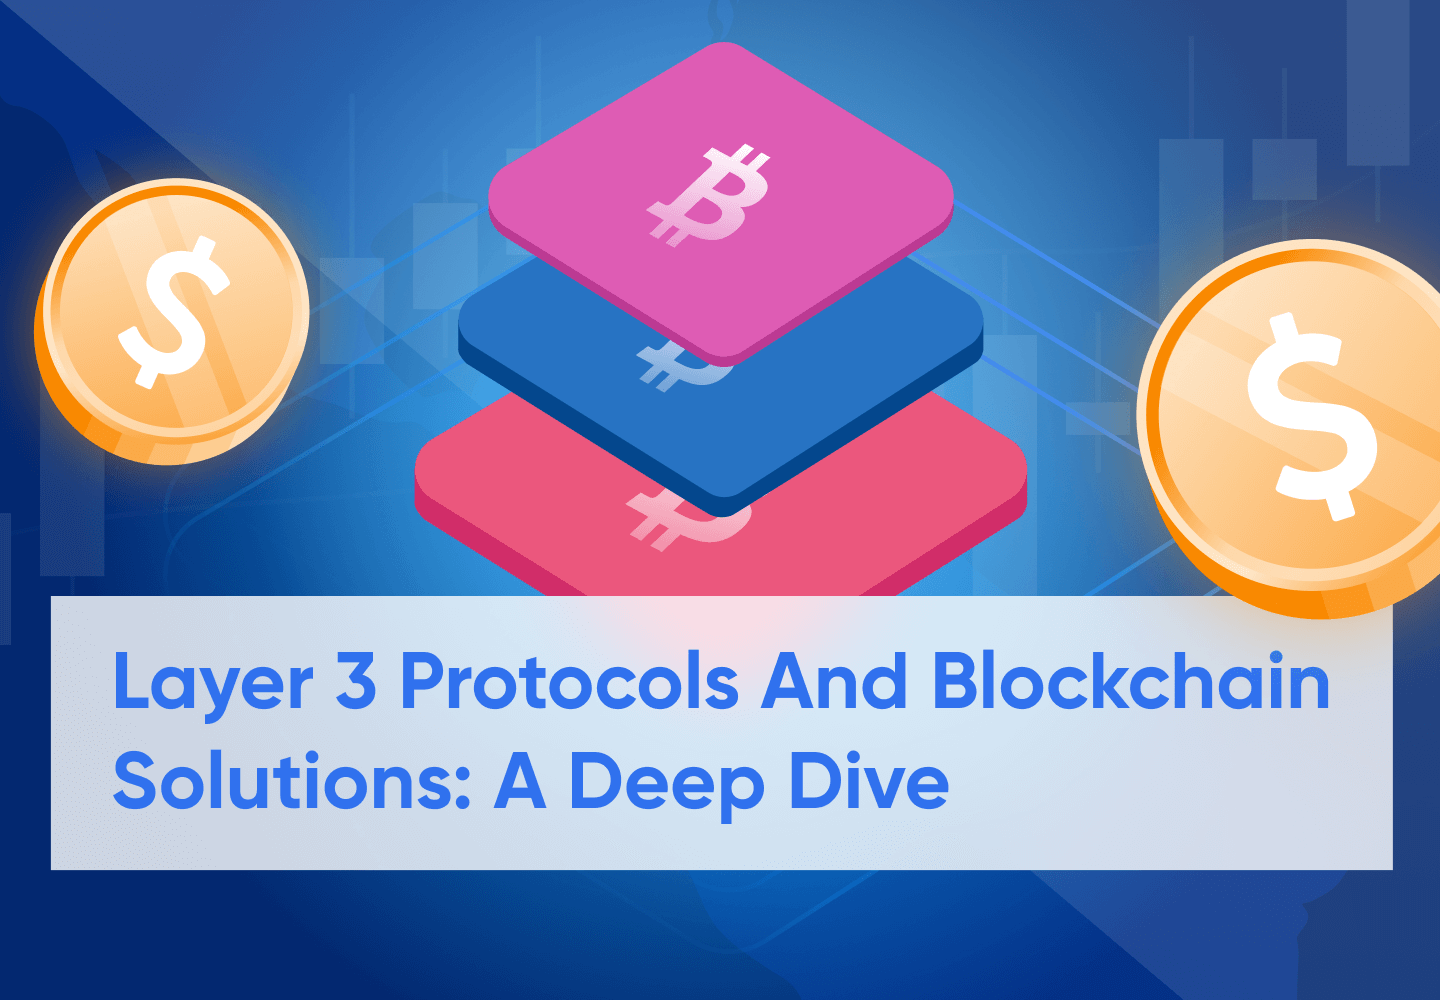 Layer 3 Protocols And Blockchain Solutions